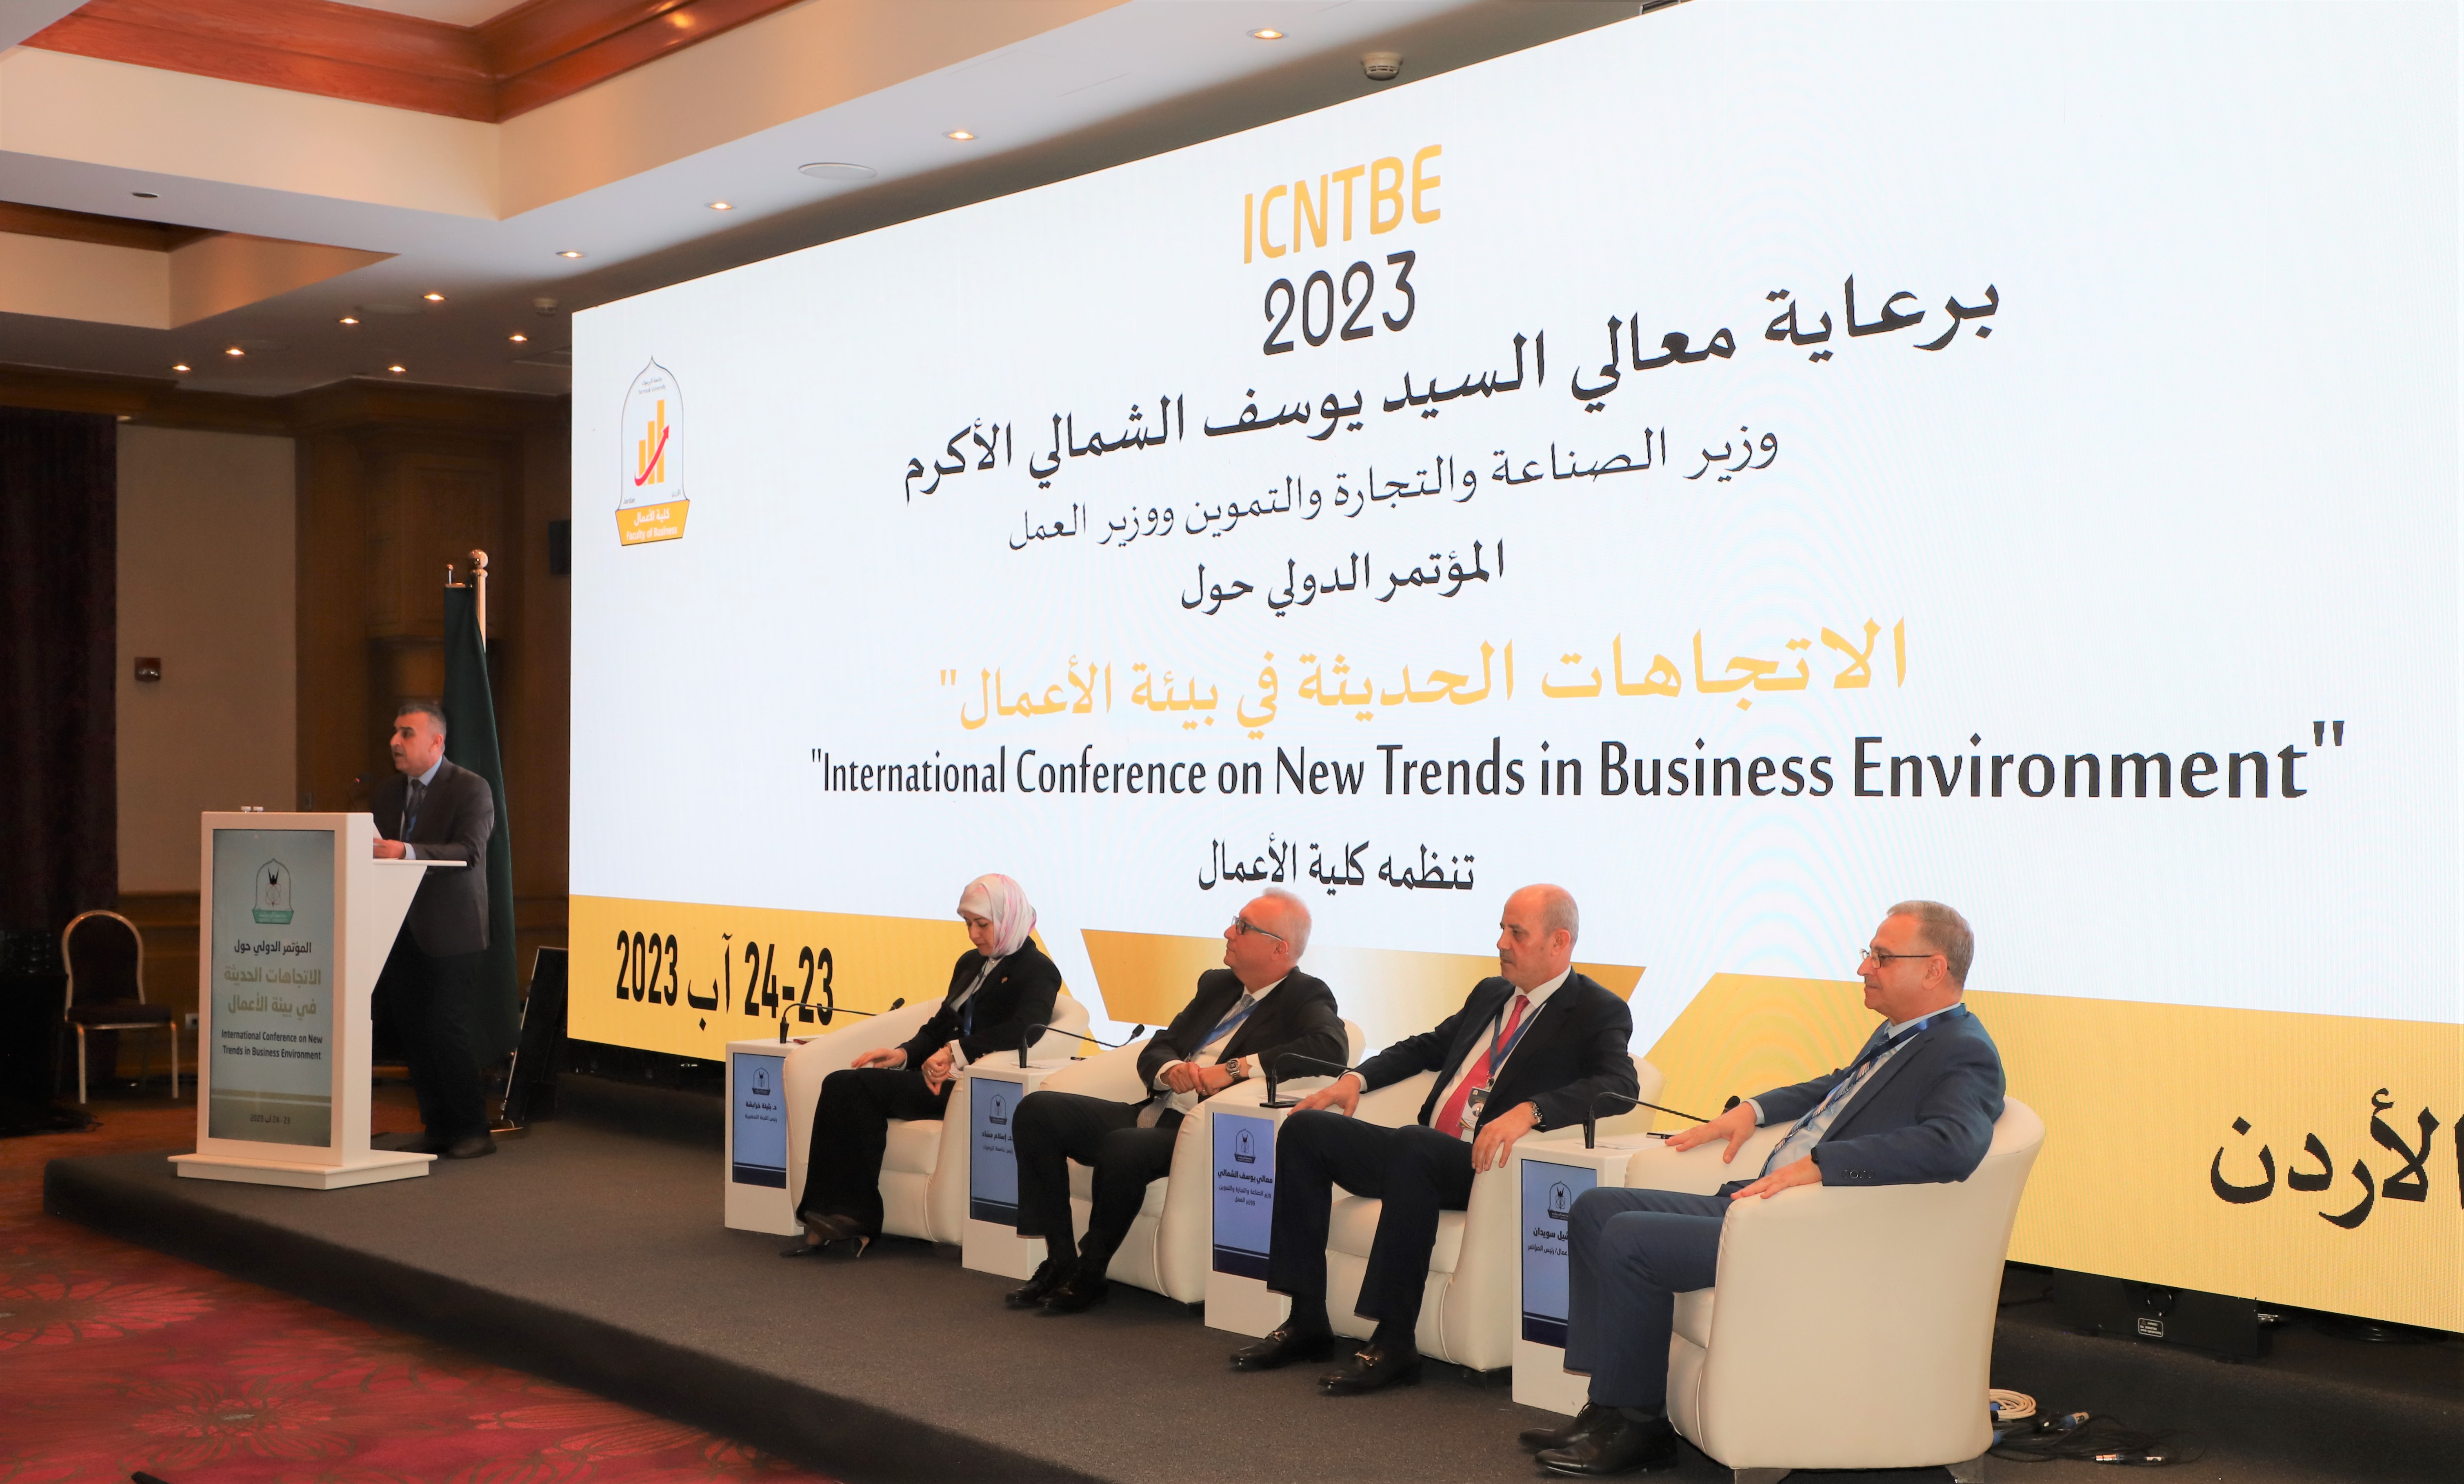 Yarmouk’s International Conference on New Trends in Business Environment